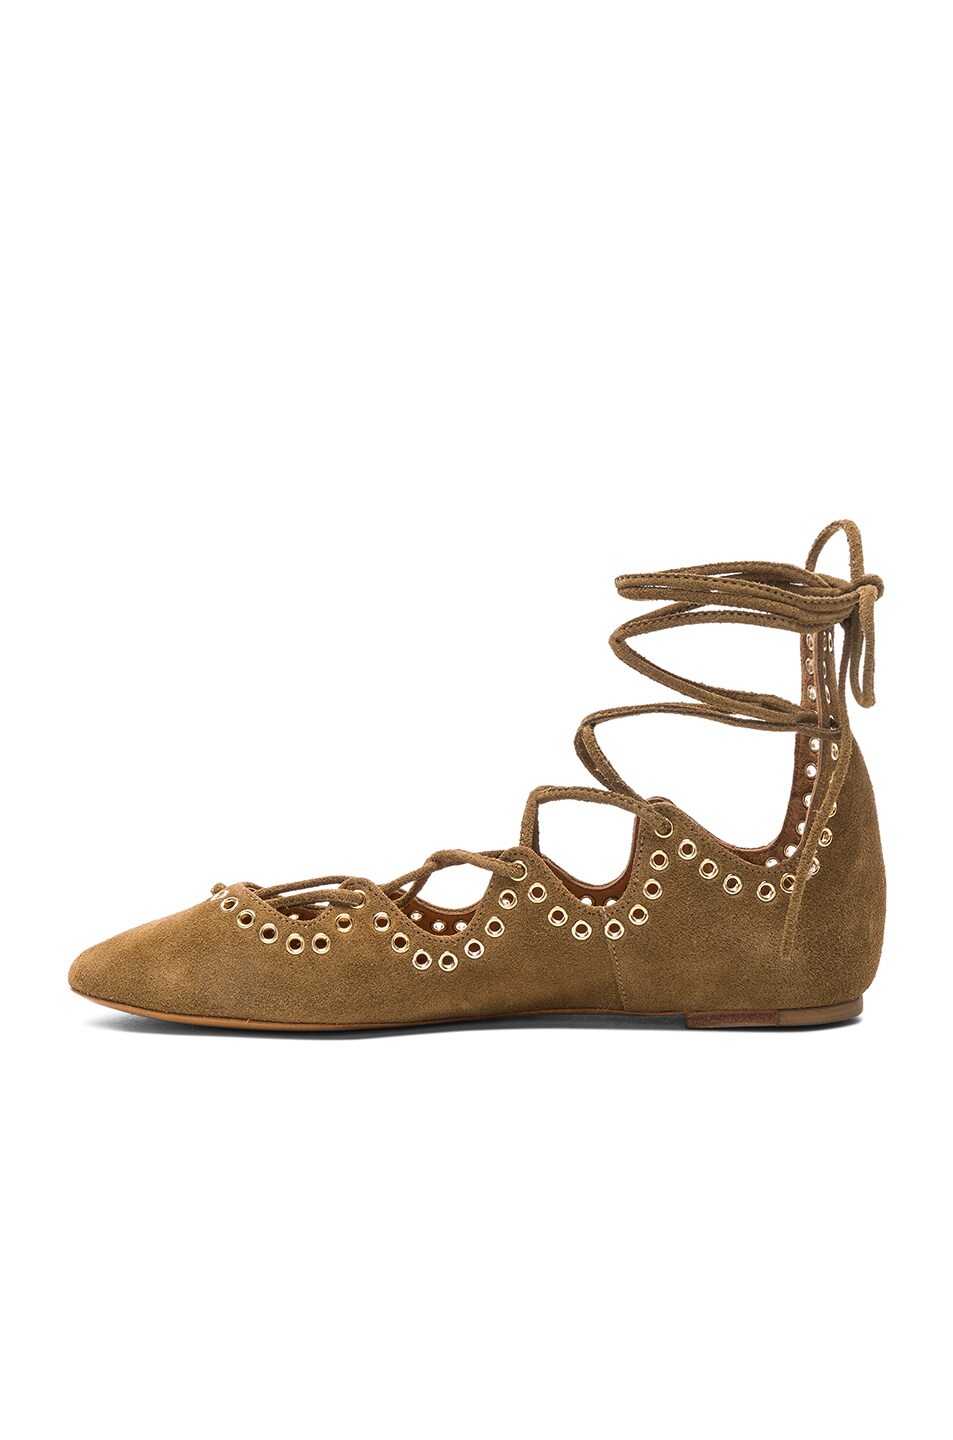 ISABEL MARANT 10Mm Leo Lace-Up Suede Ballerinas, Brown | ModeSens